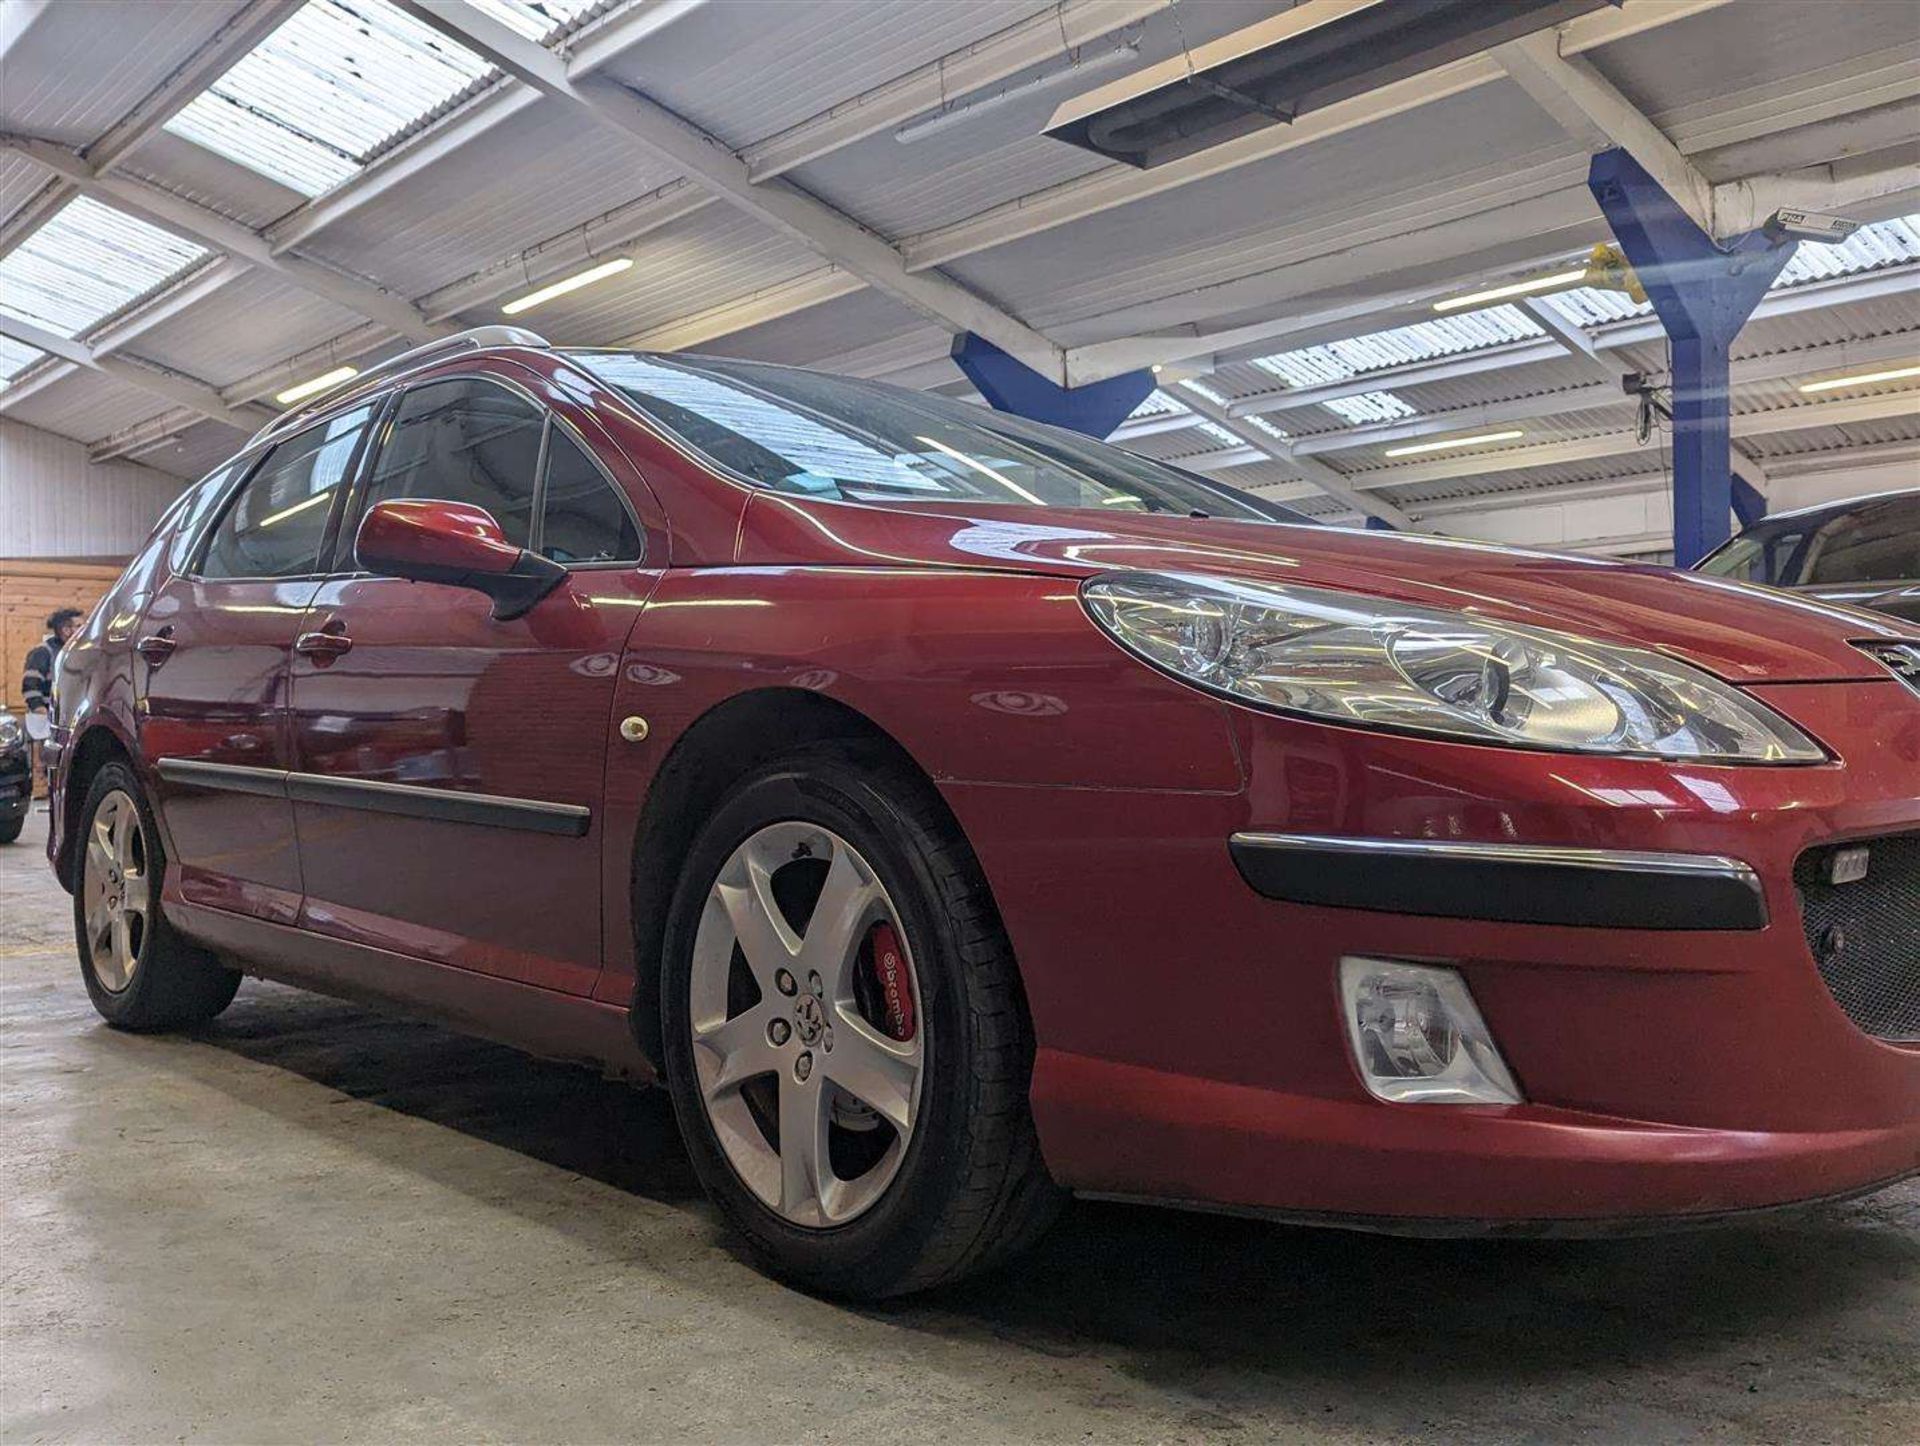 2007 PEUGEOT 407 SW SE HDI - Image 12 of 30